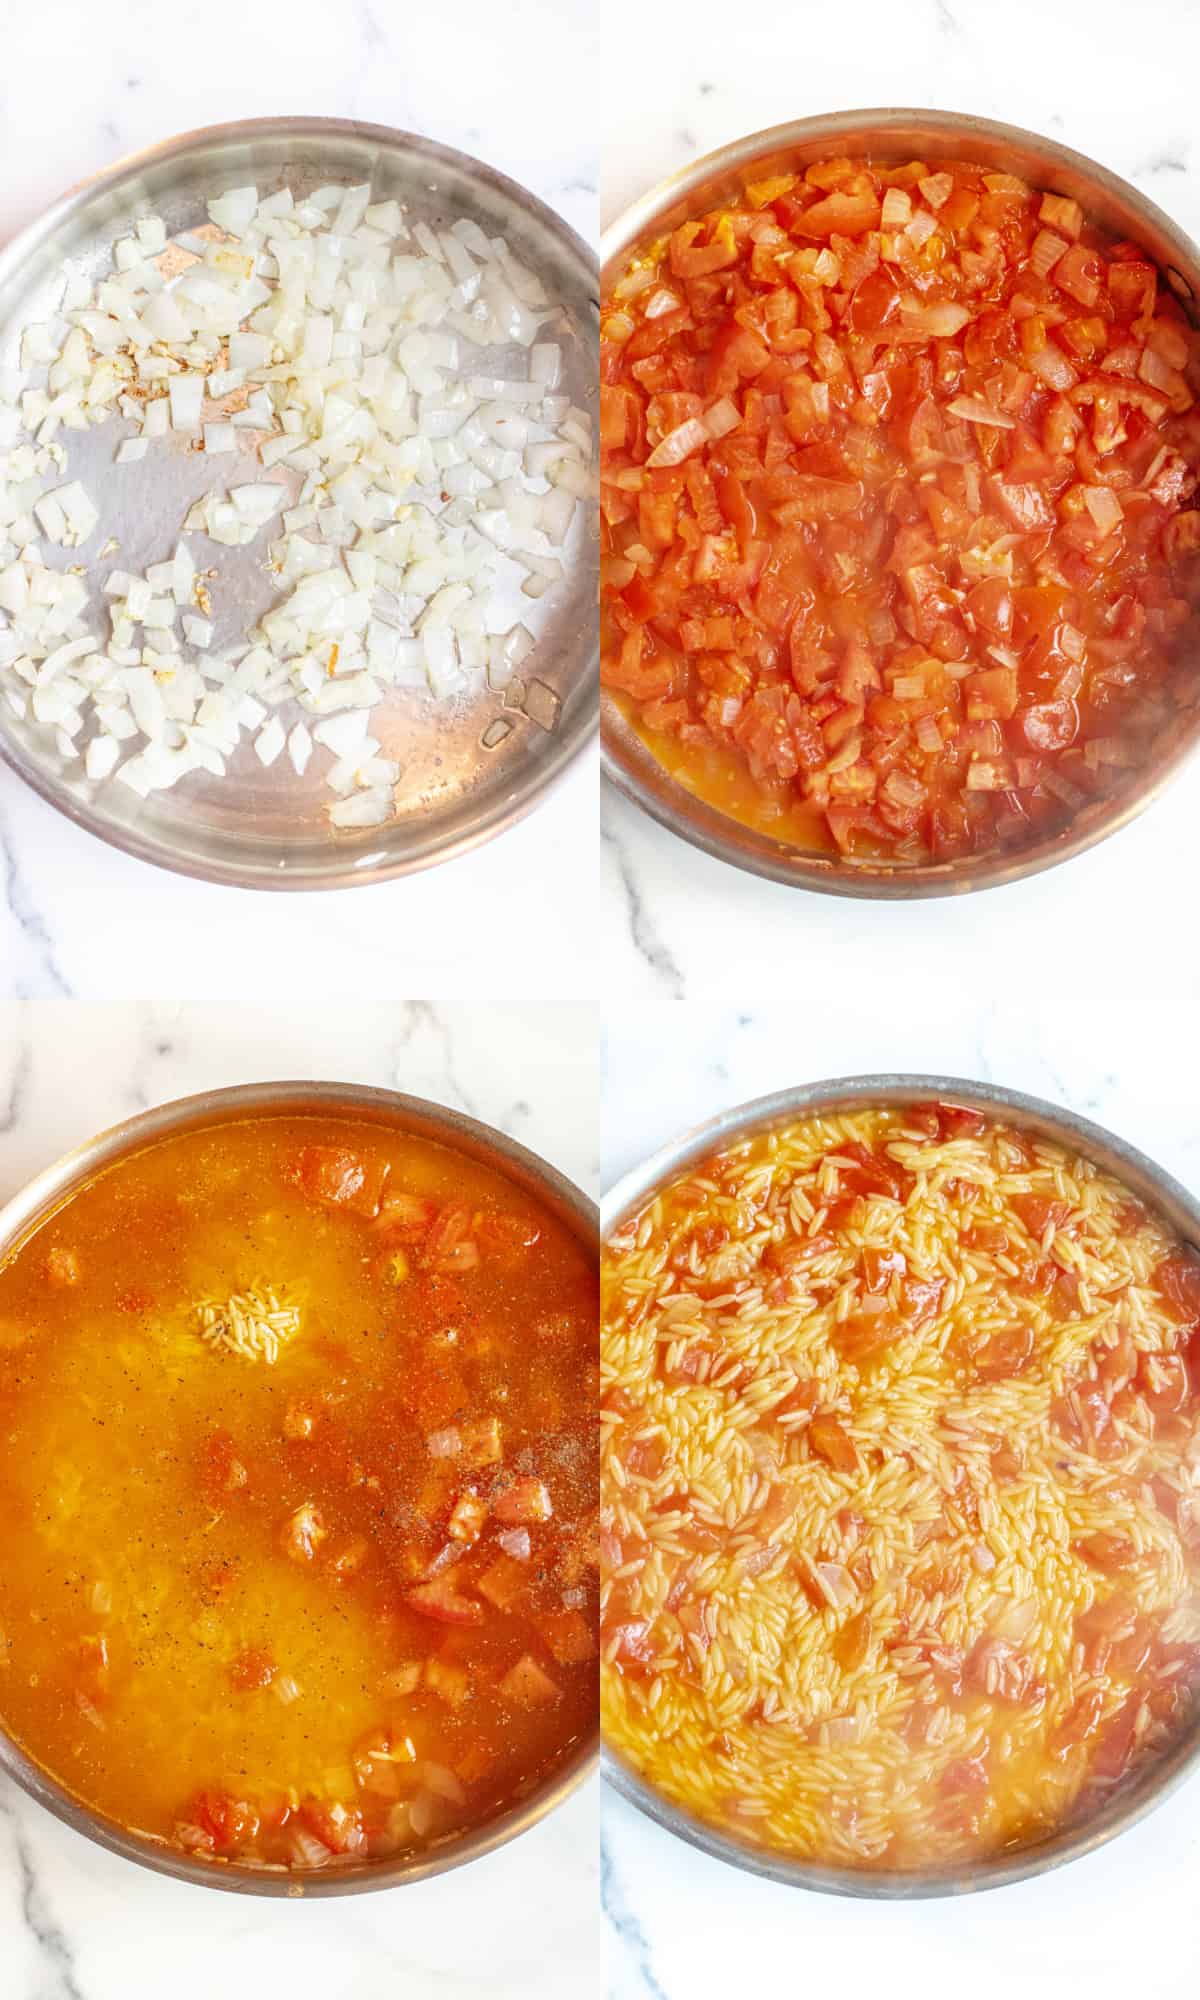 4 pictures of pans, one with sauteed onions, with tomatoes added, and then with stock and orzo added and cooked orzo.